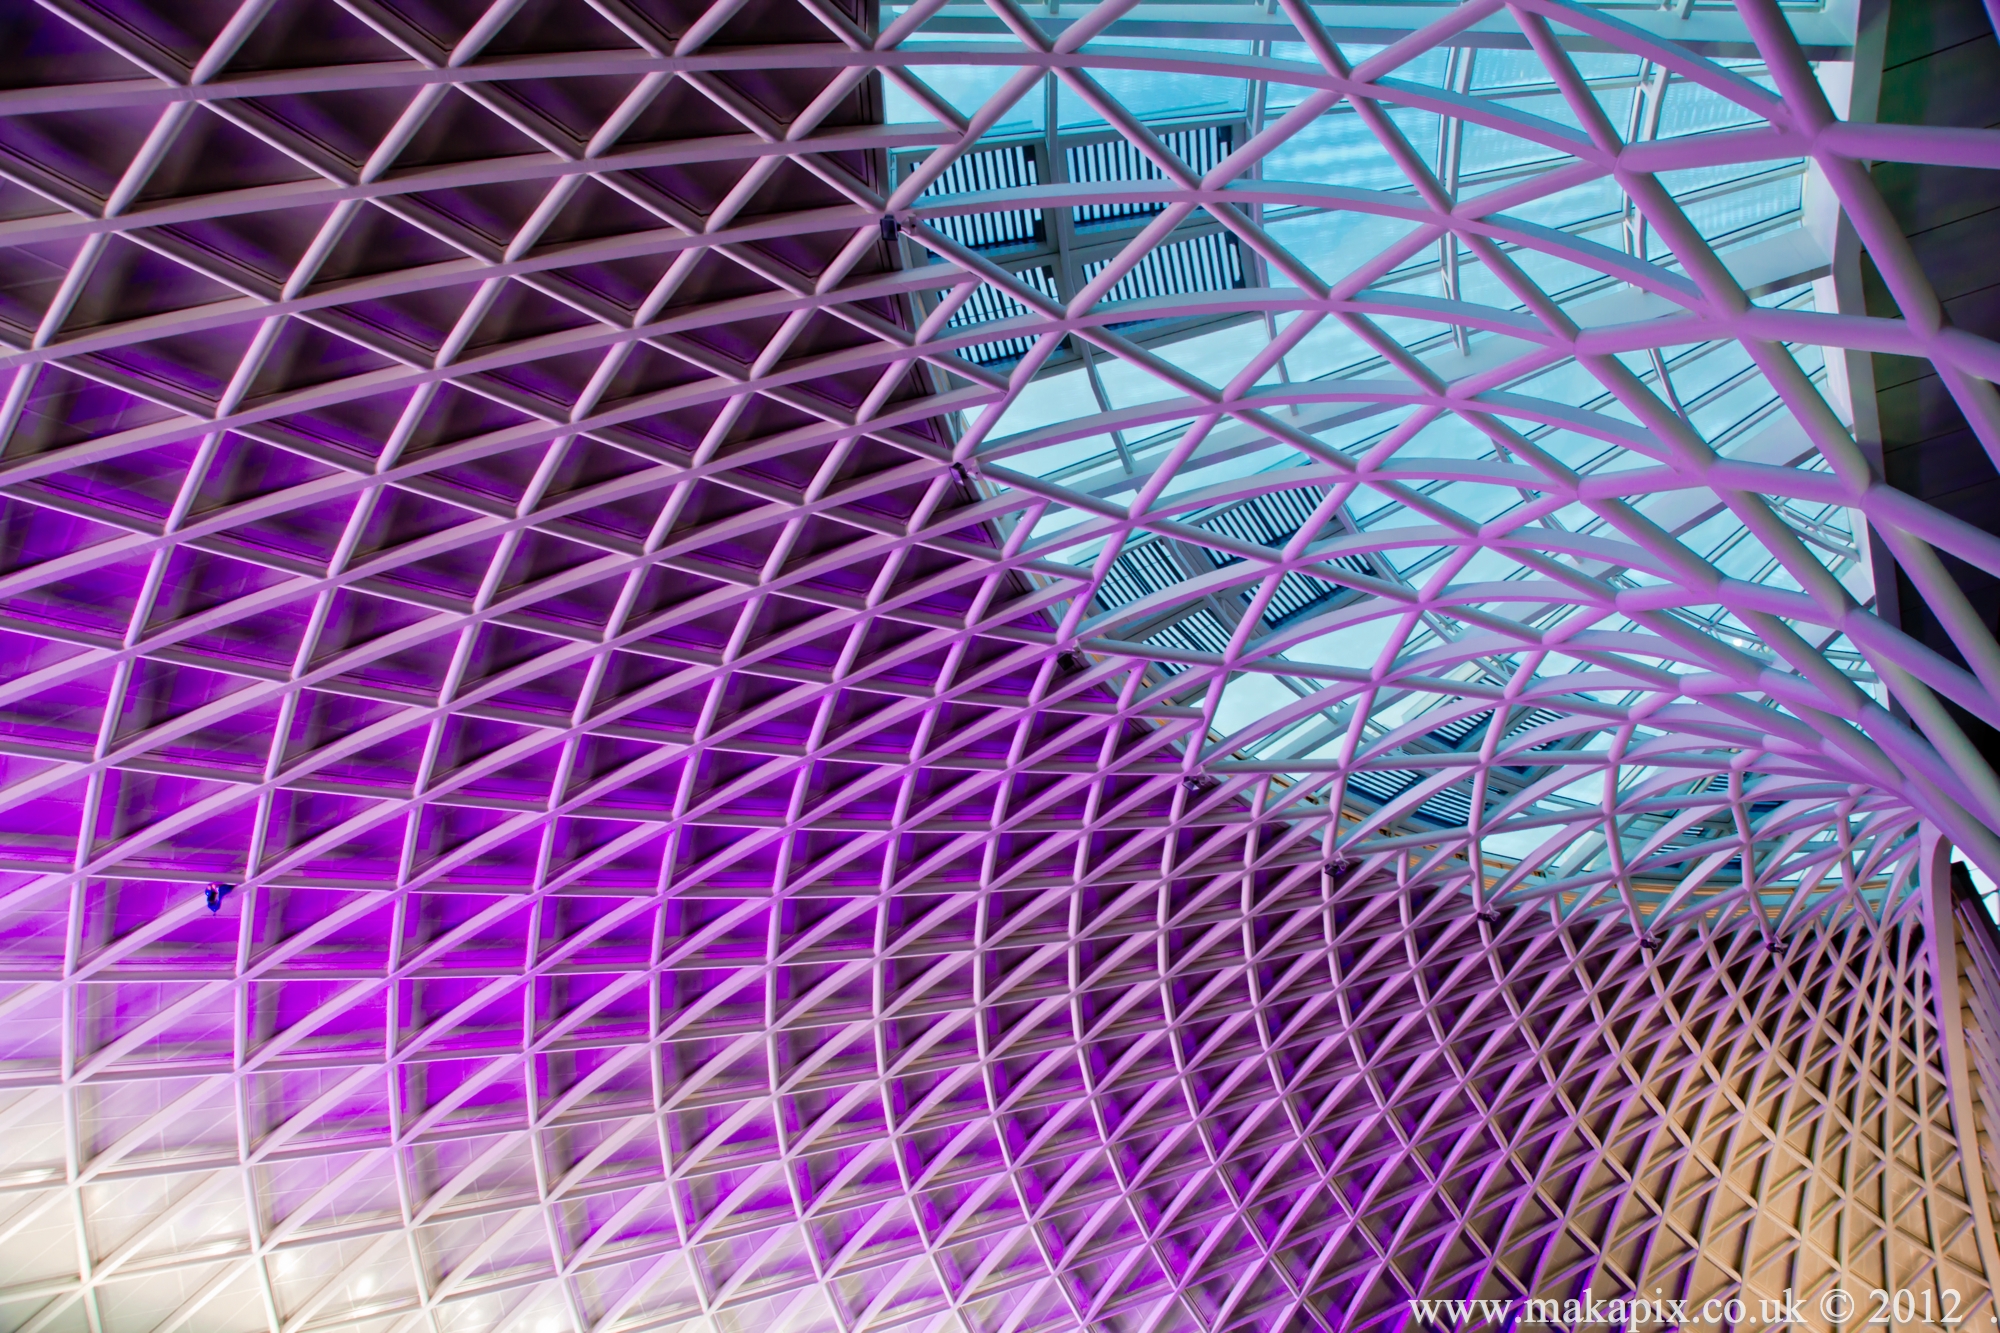 King's Cross station diagrid roof, London, England